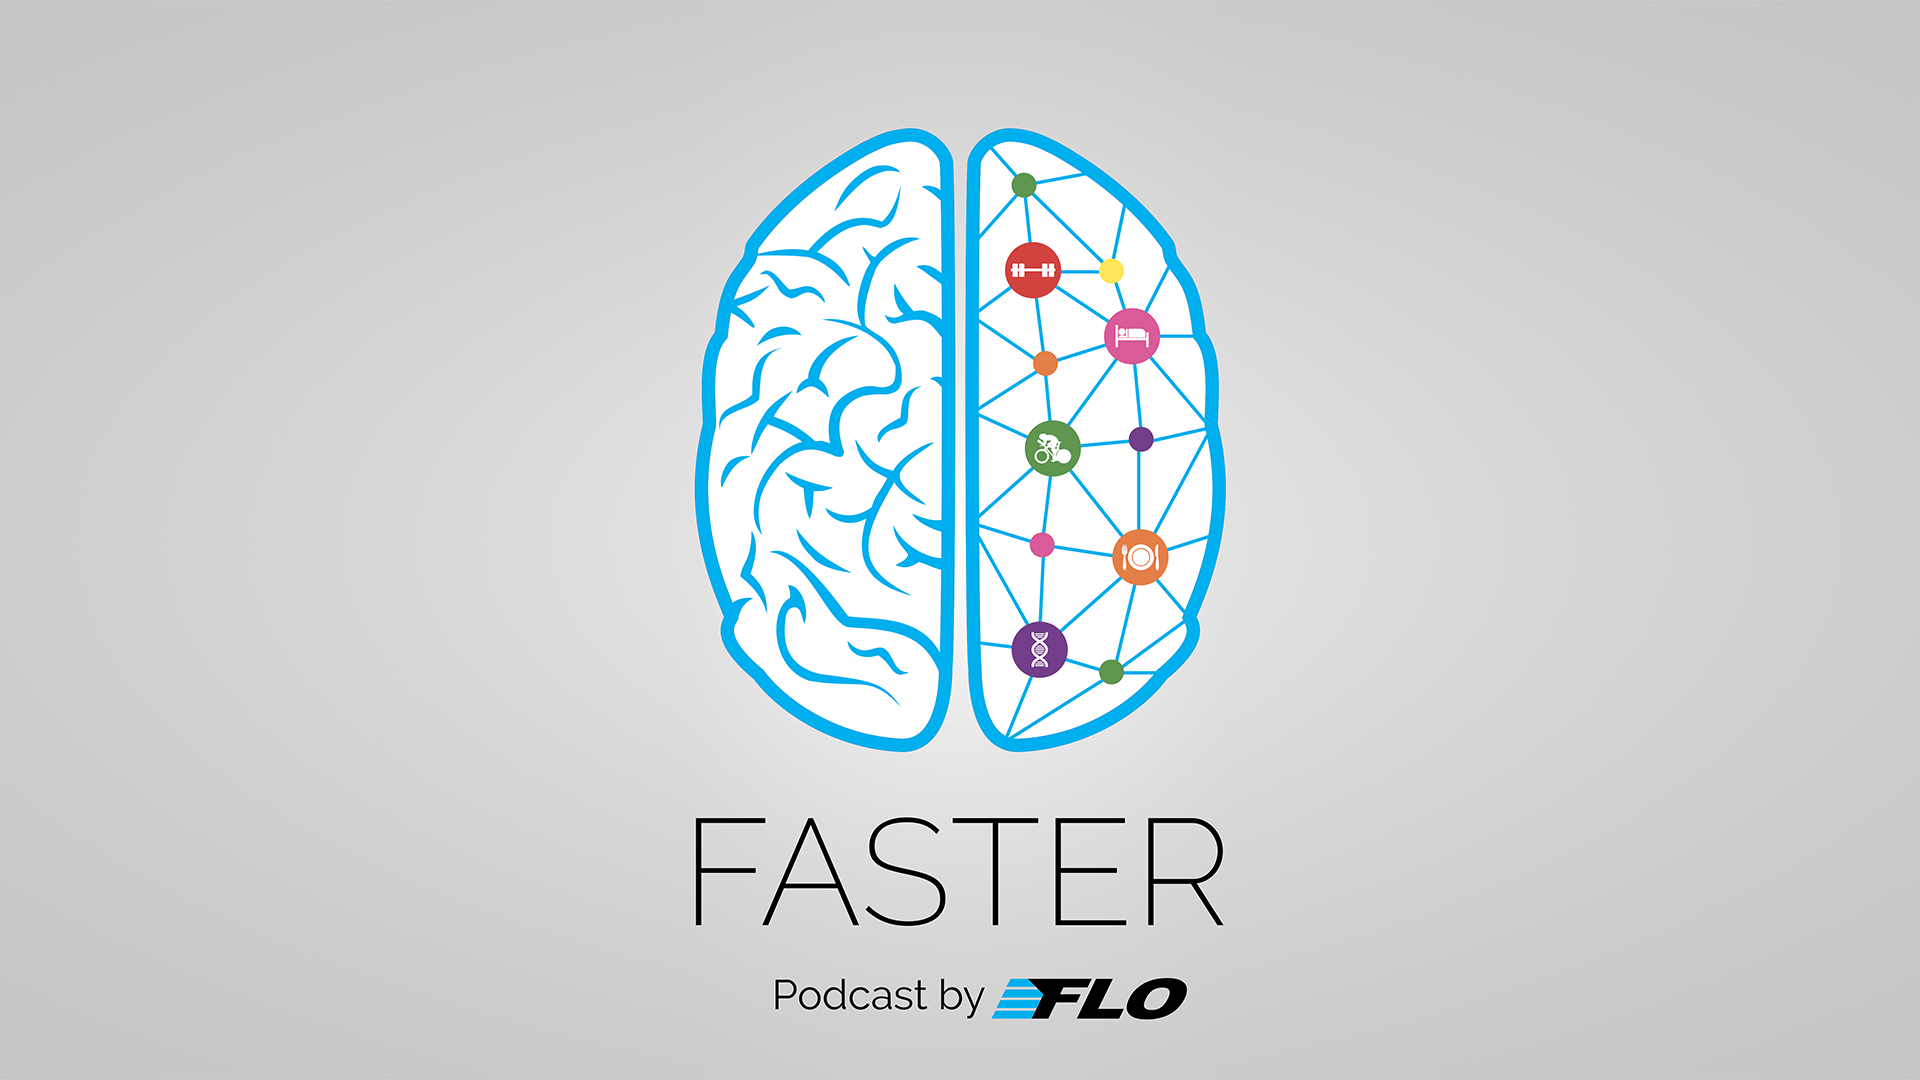 Polarized Training – A Detailed Look with Stephen Seiler (Faster by FLO Podcast #13)